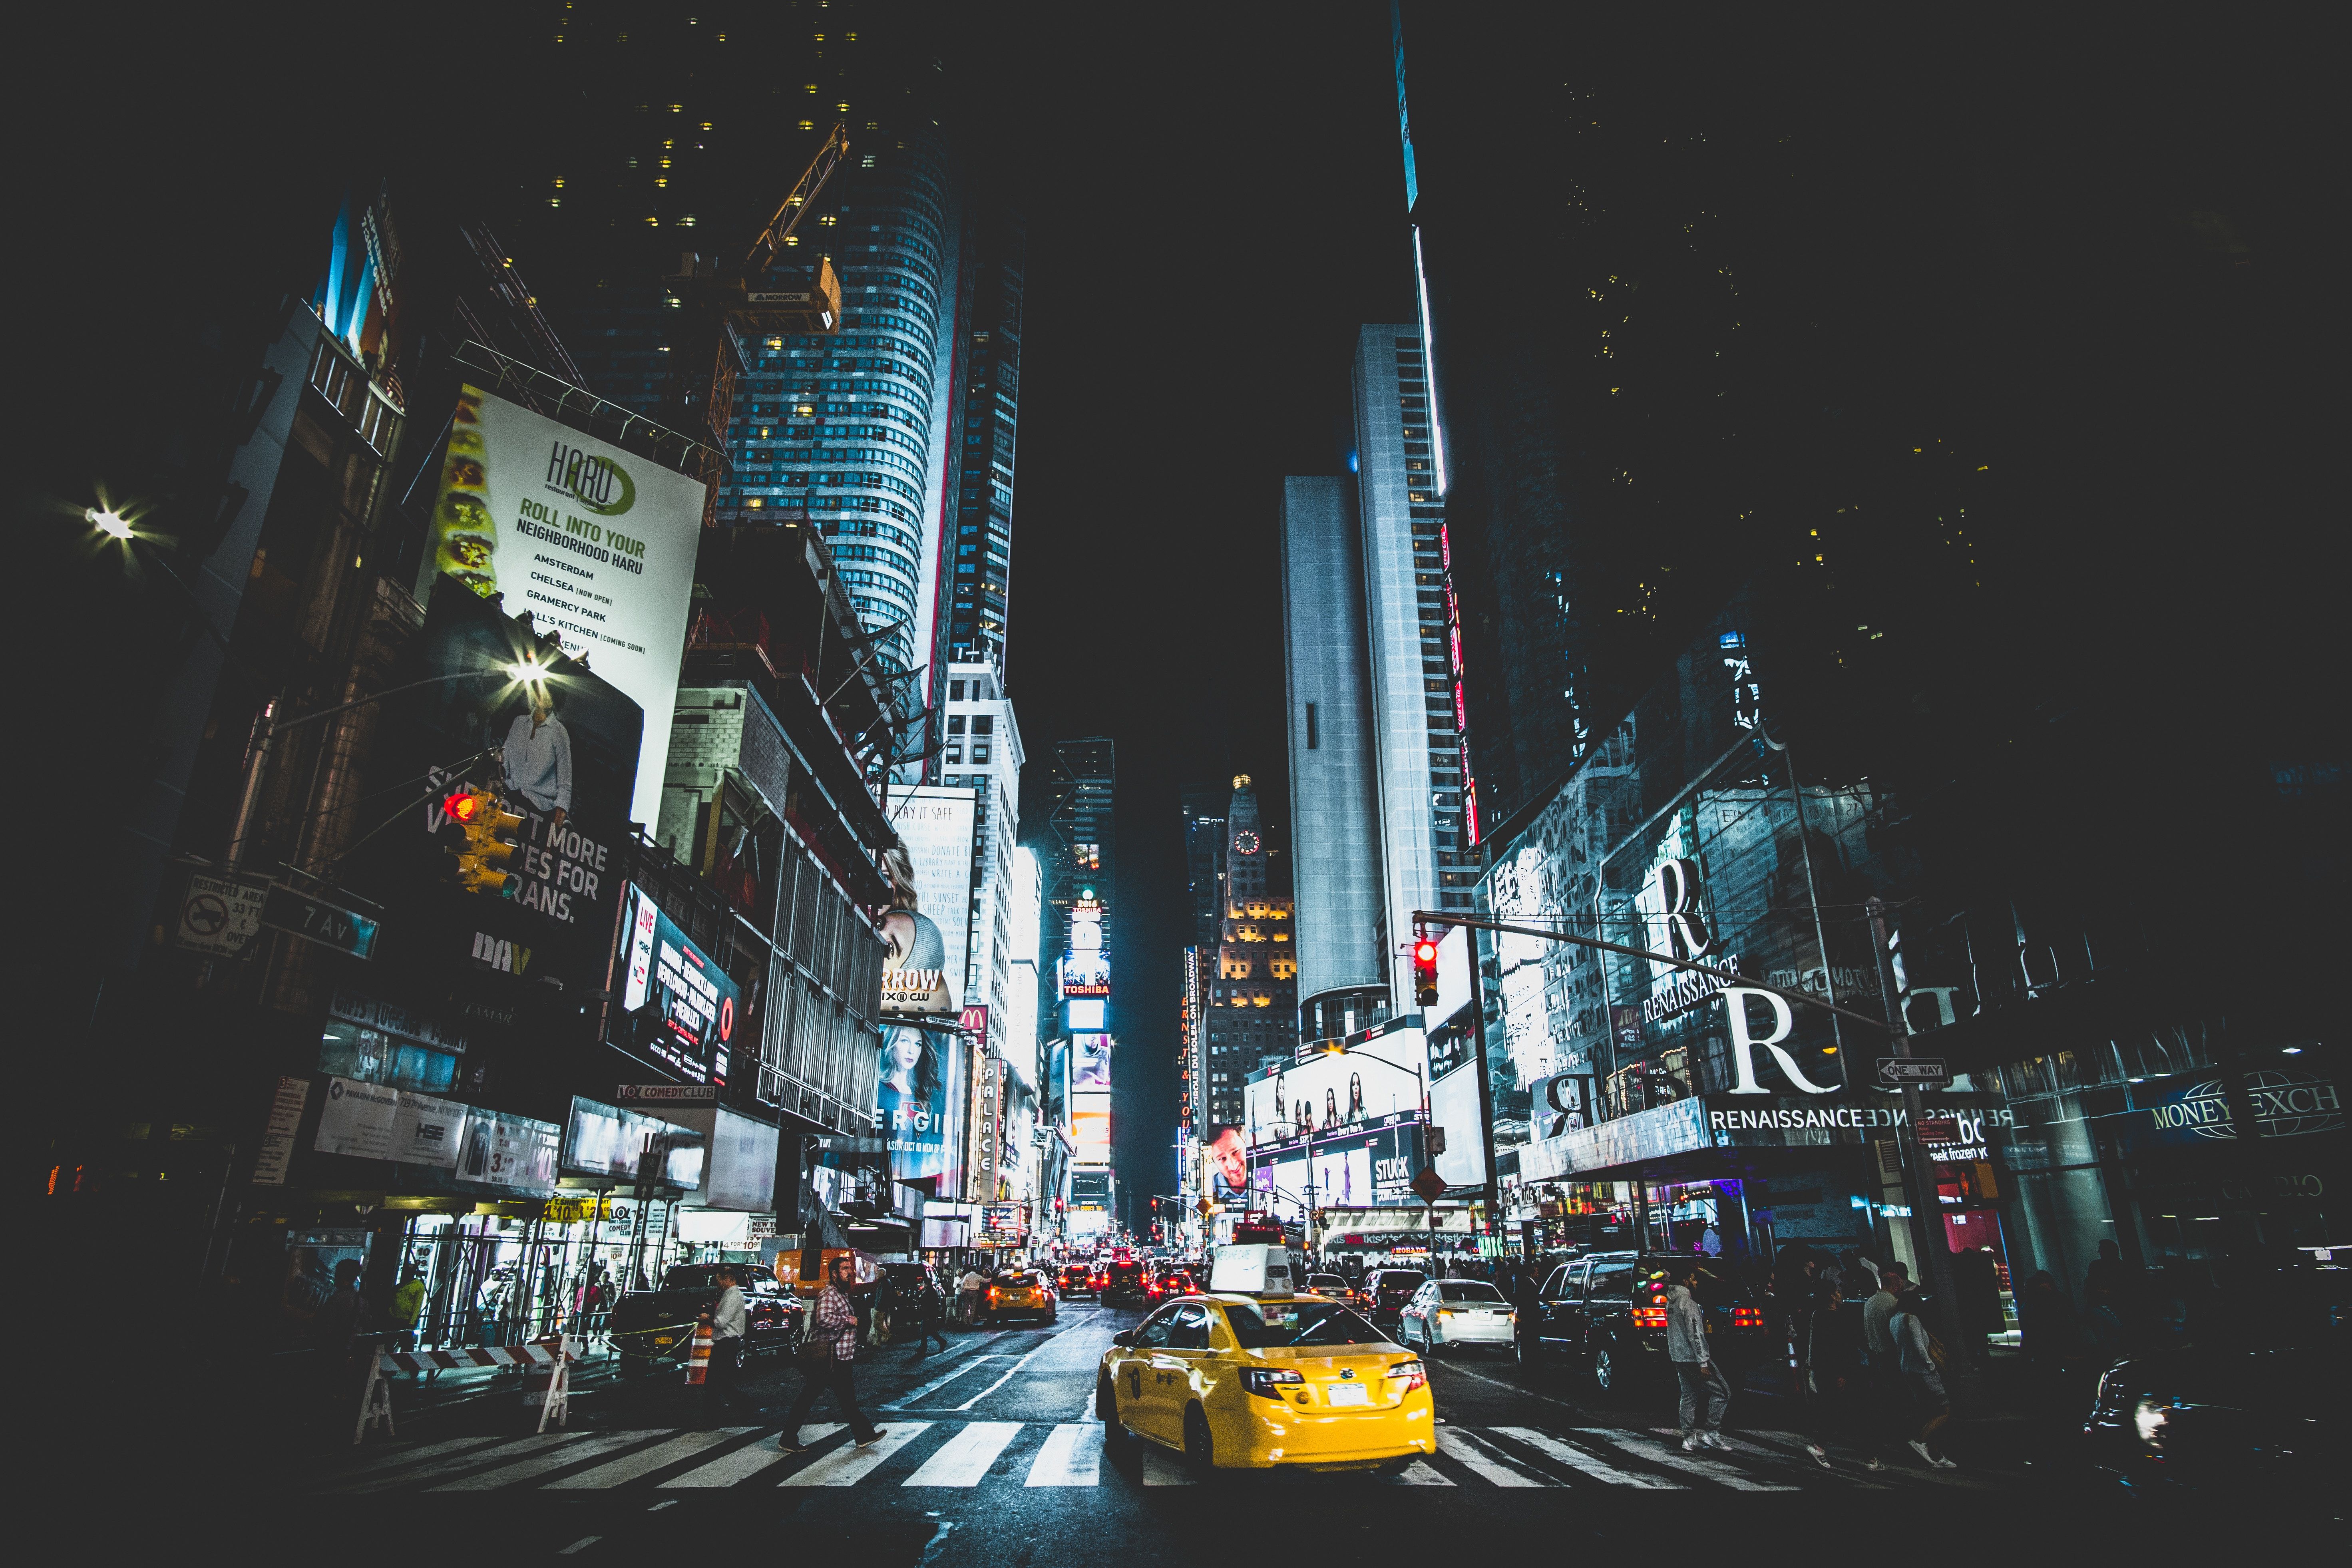 5886x3924 #Public domain image, #street, #new york city, #times square, #new york, #crossing, #building, #traffic, #wallpaper, #city life, #night photography, #moody, #night, #city, #urban, #background, #street photography, #moody edit, #crowd